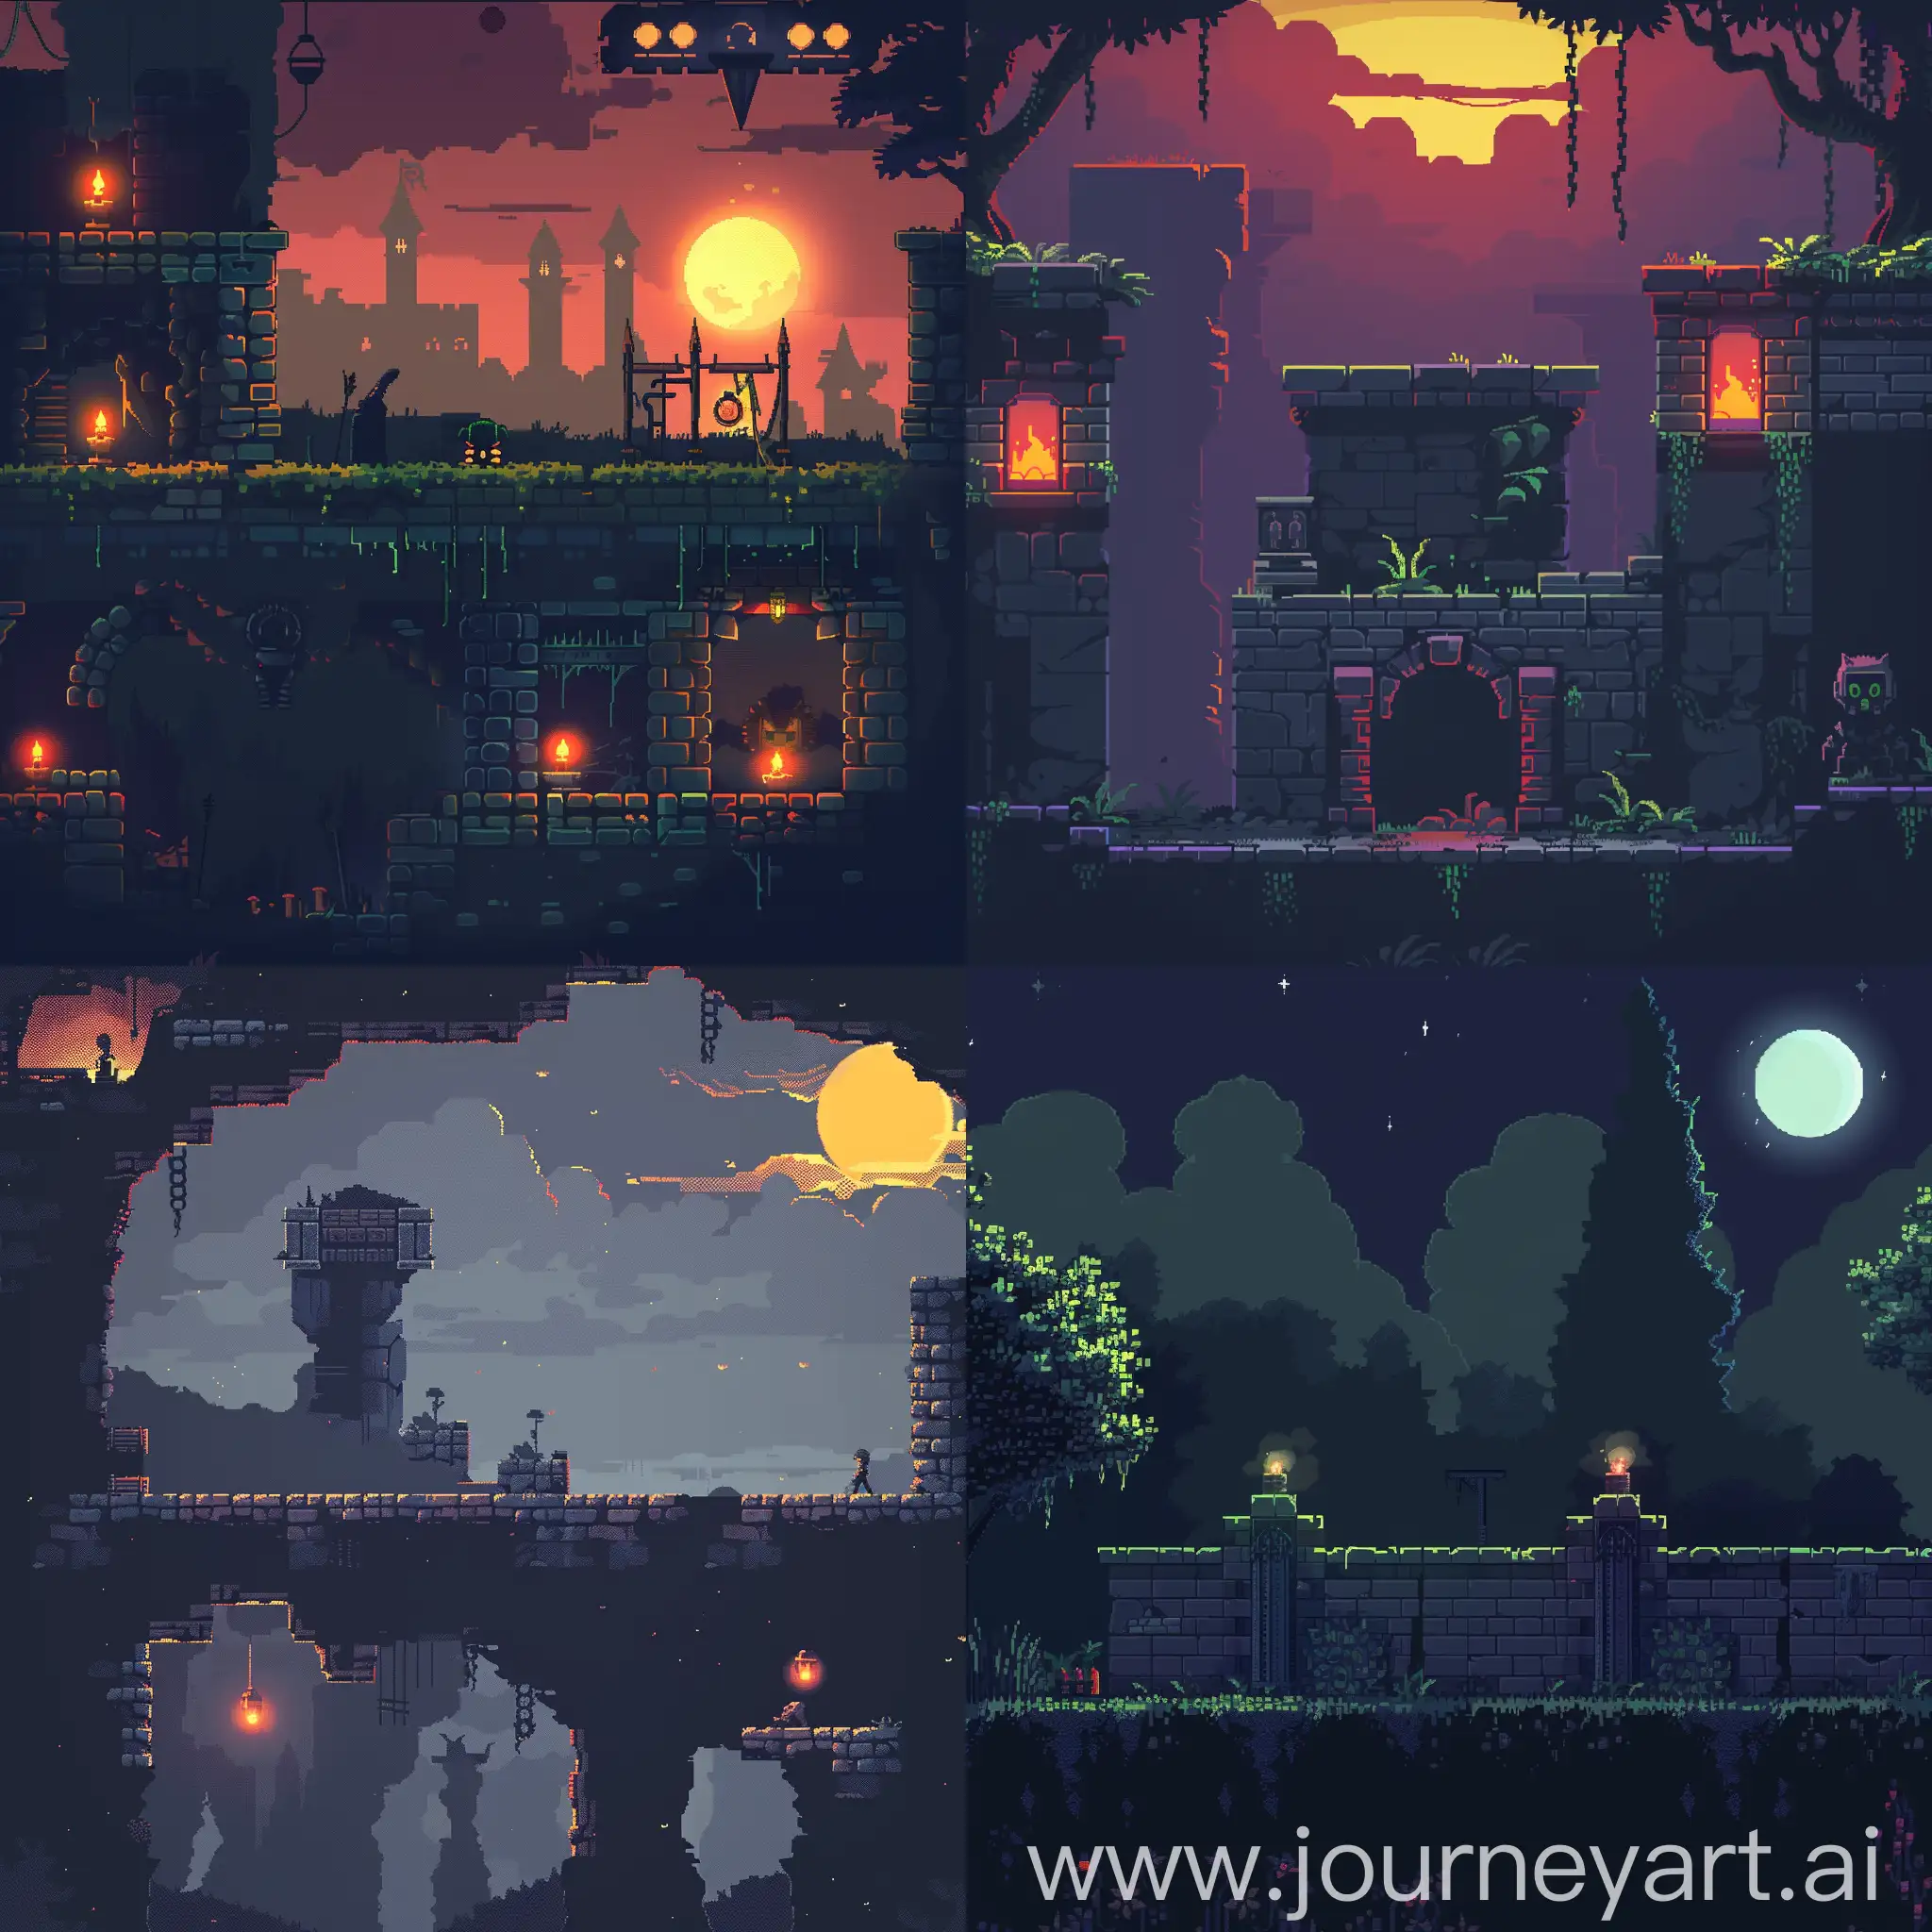 a screen game in 2d for a plataformer game in dark style